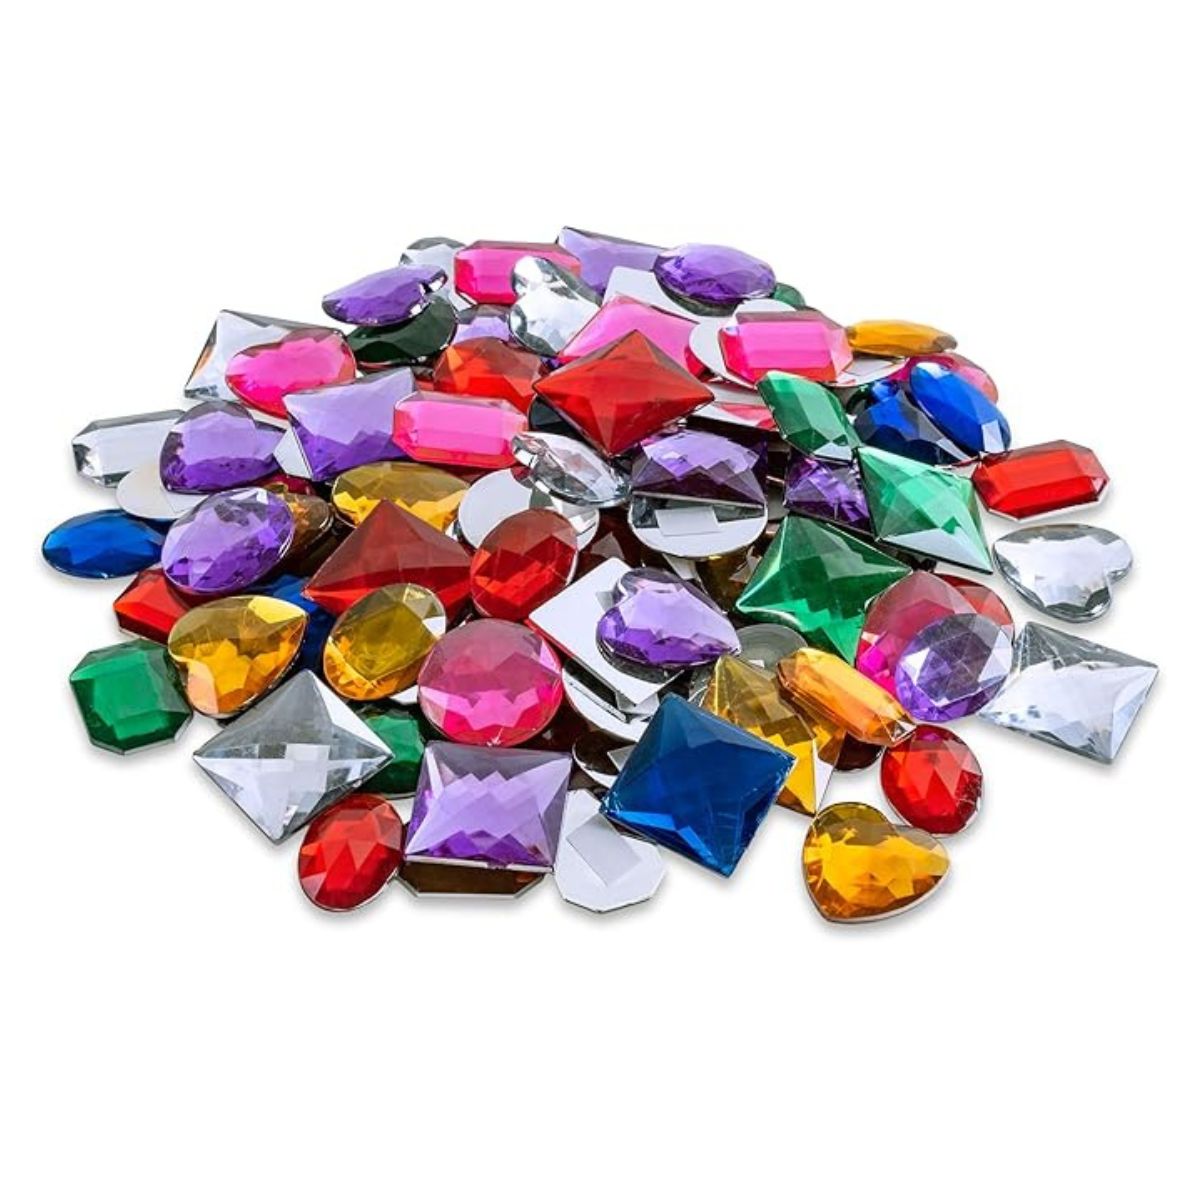 1-Inch Psychedelic Gems 100 pcs